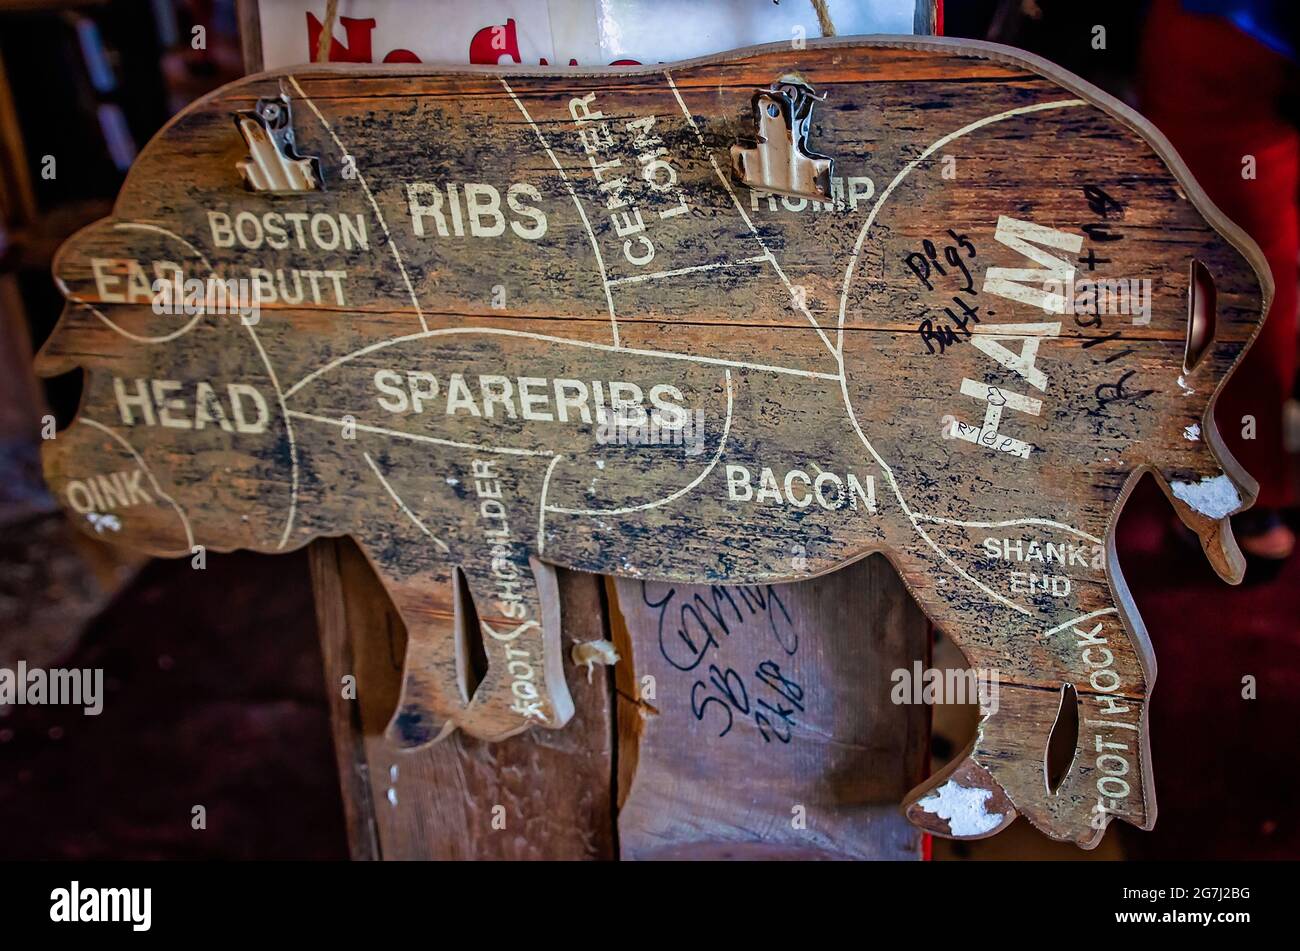 A wooden pig diagram shows the cuts of pork in relation to the animal body parts at The Shed Barbeque and Blues Joint, July 4, 2021, in Ocean Springs, Stock Photo